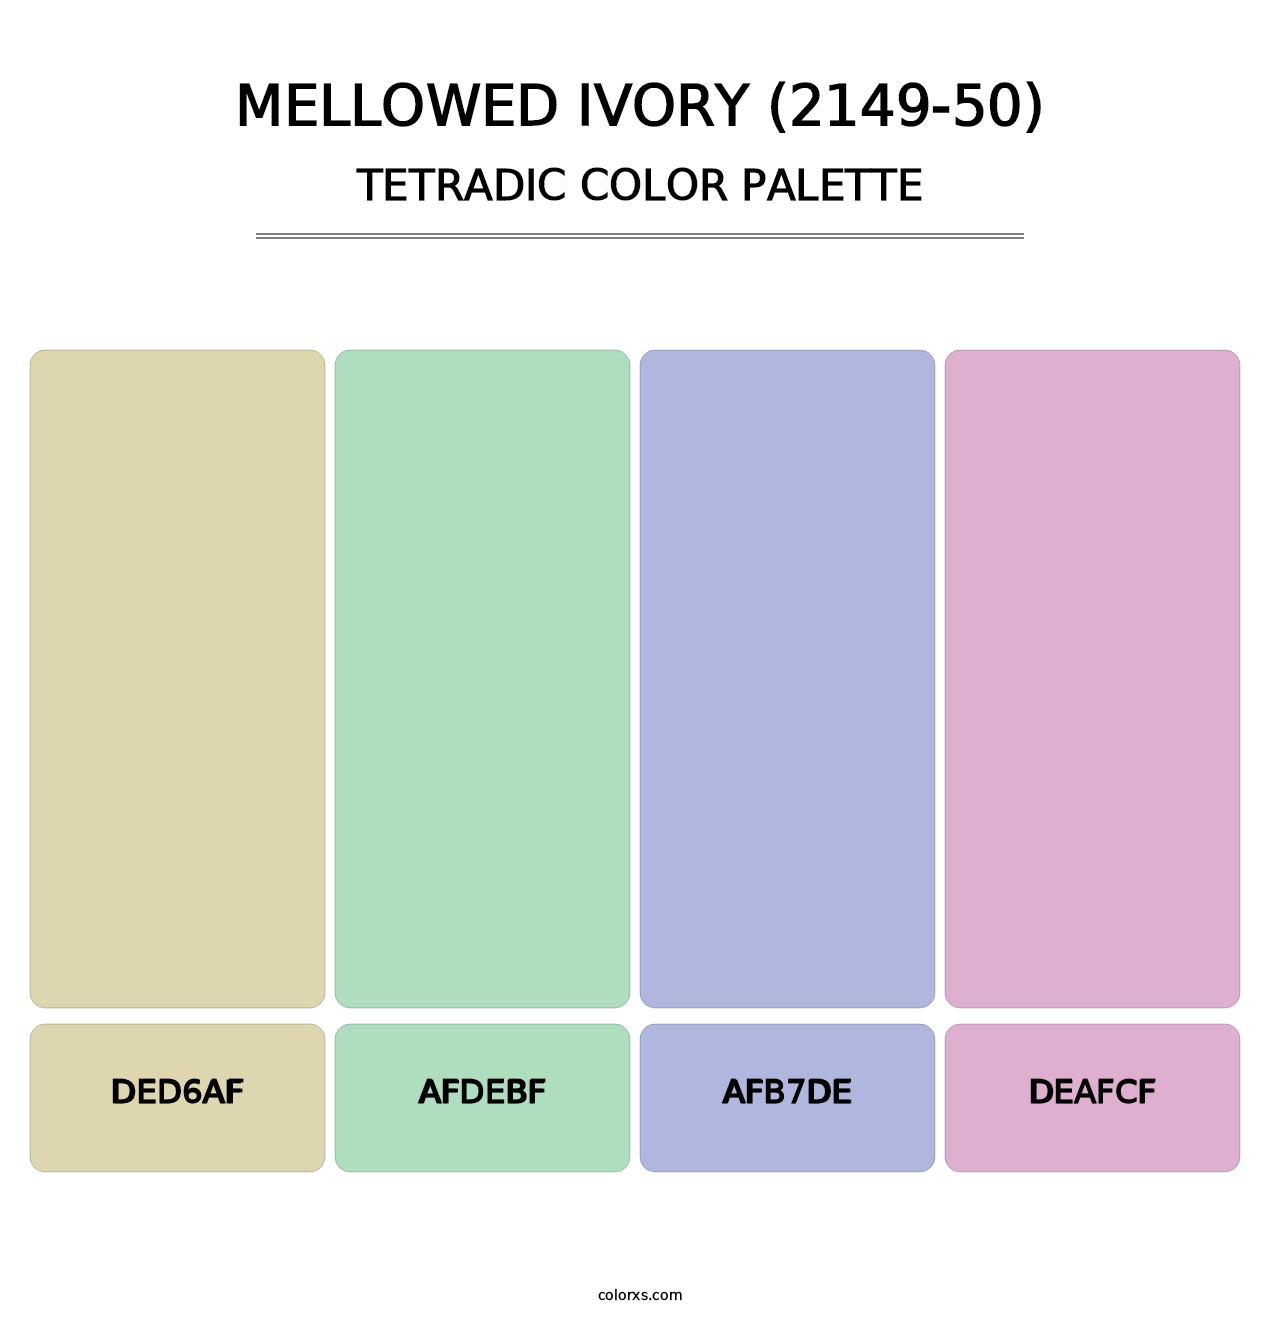 Mellowed Ivory (2149-50) - Tetradic Color Palette